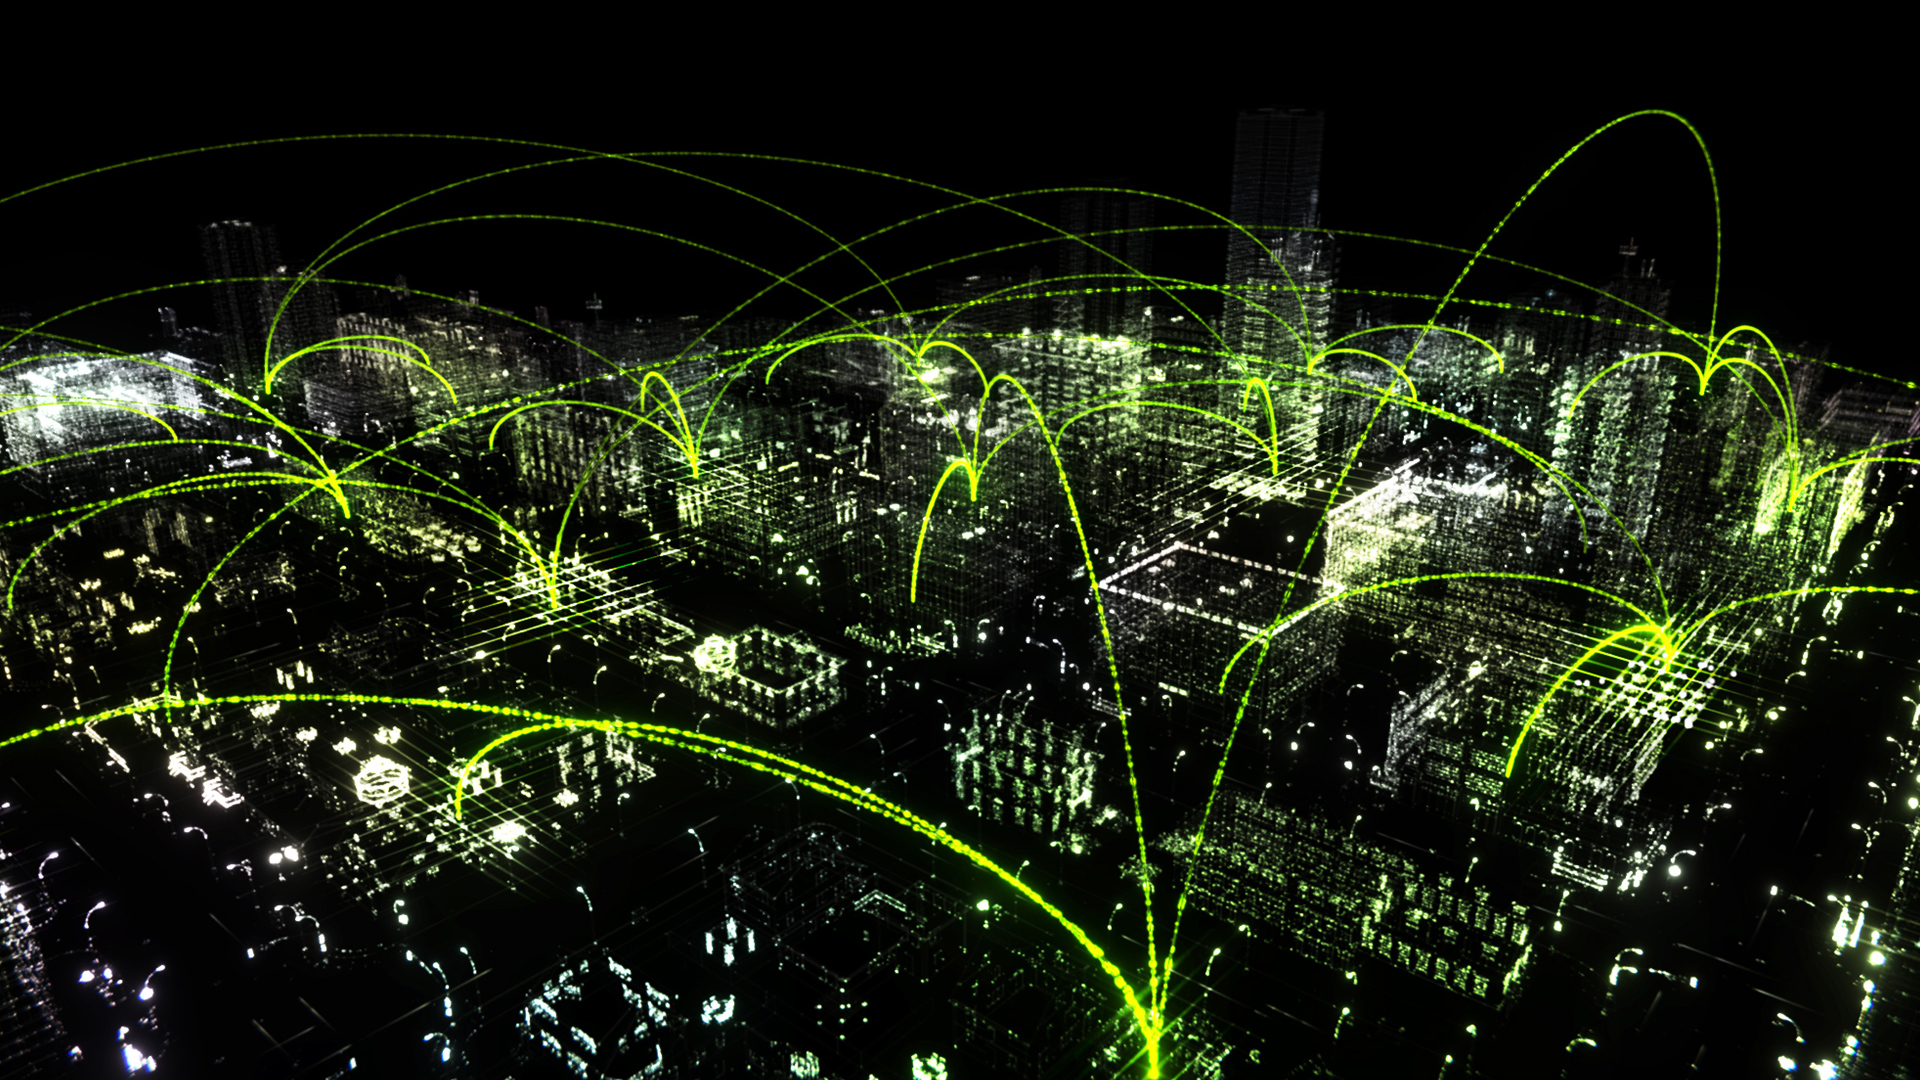 Decorate image of a city with light trails suggesting a network.